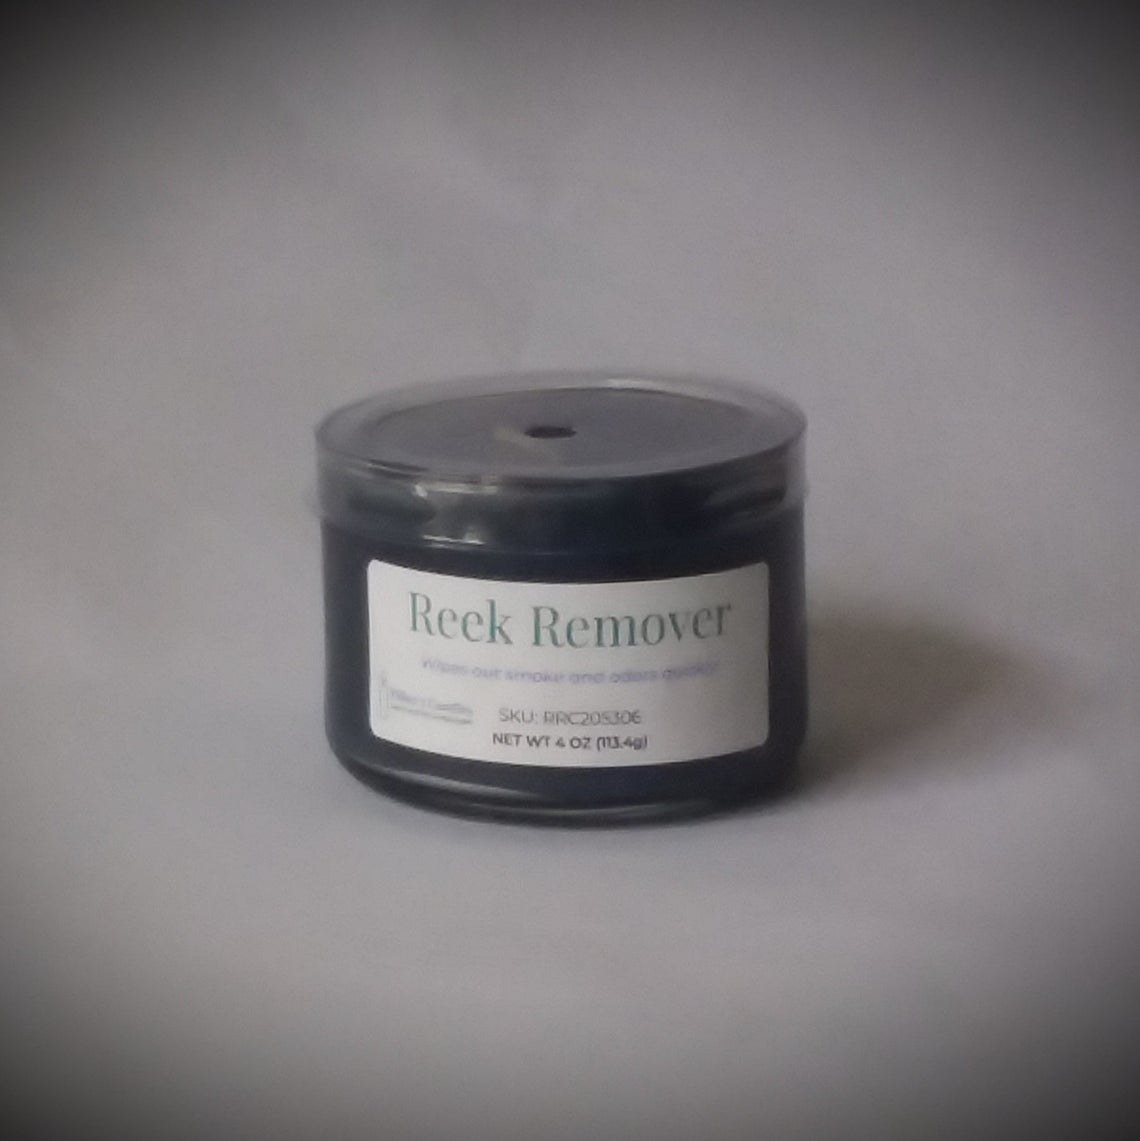 The Reek Remover odor removing candle